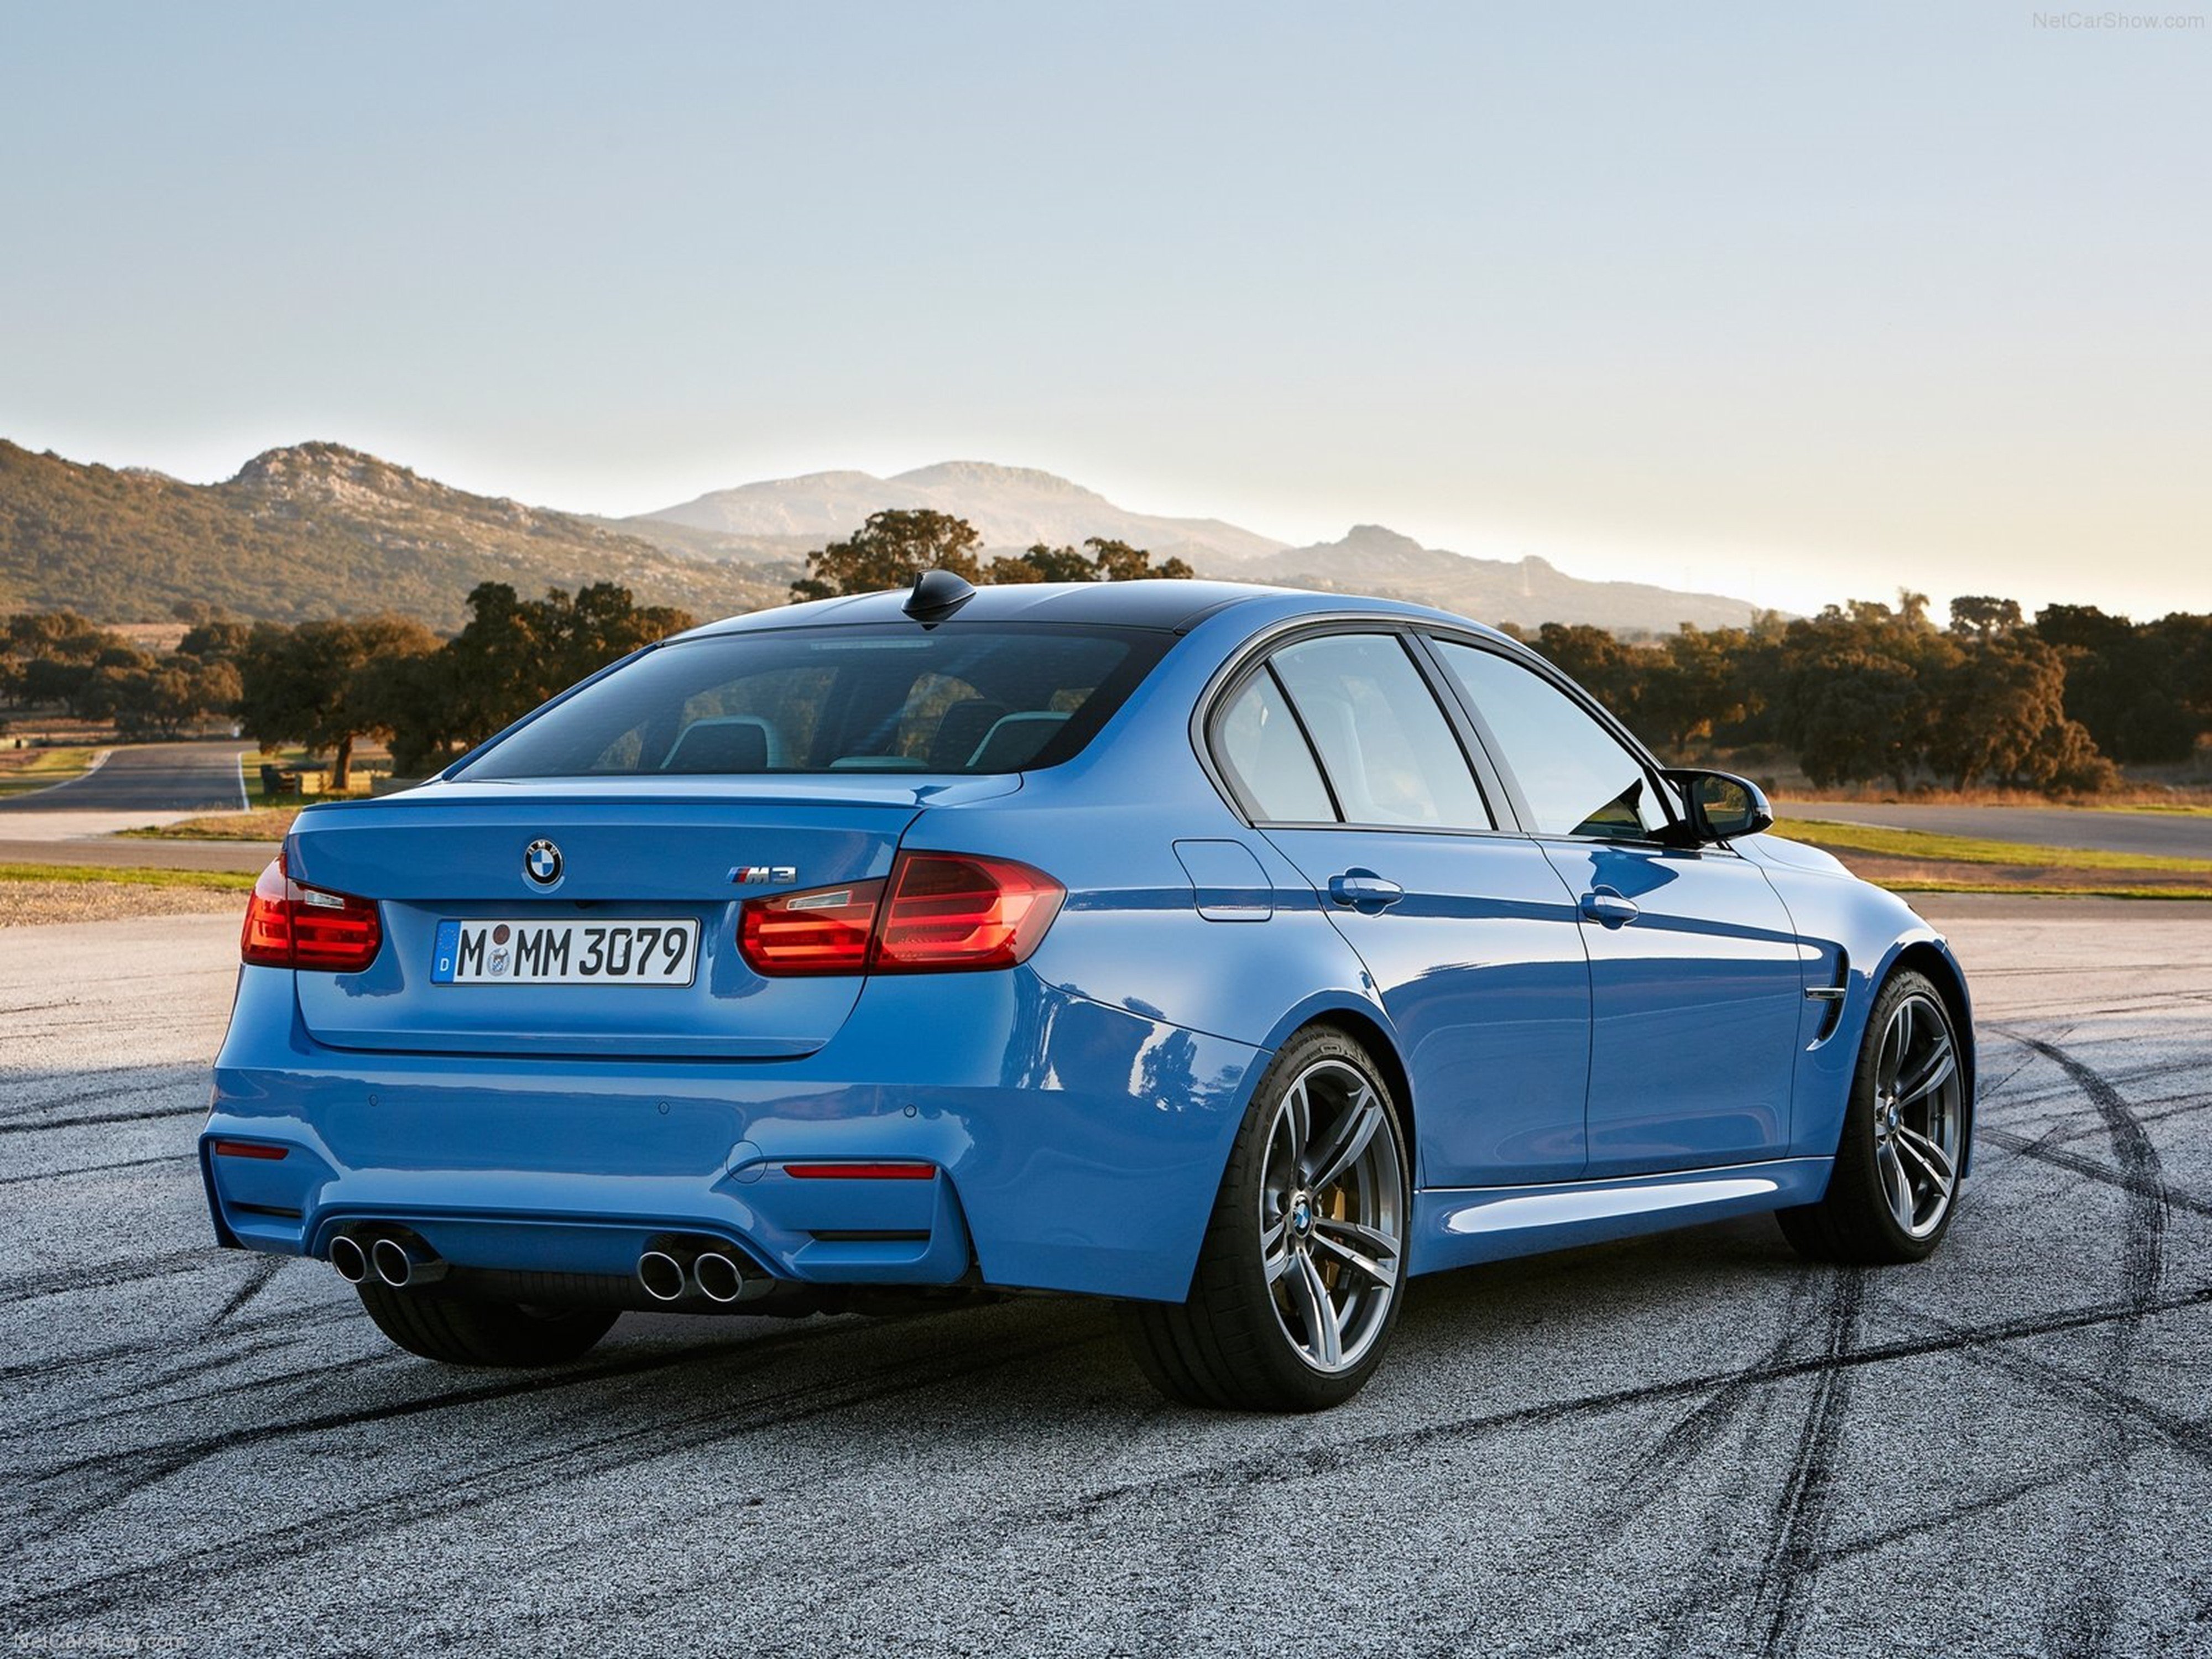 A Luxurious Driving Experience: The 2015 BMW M3 Sedan